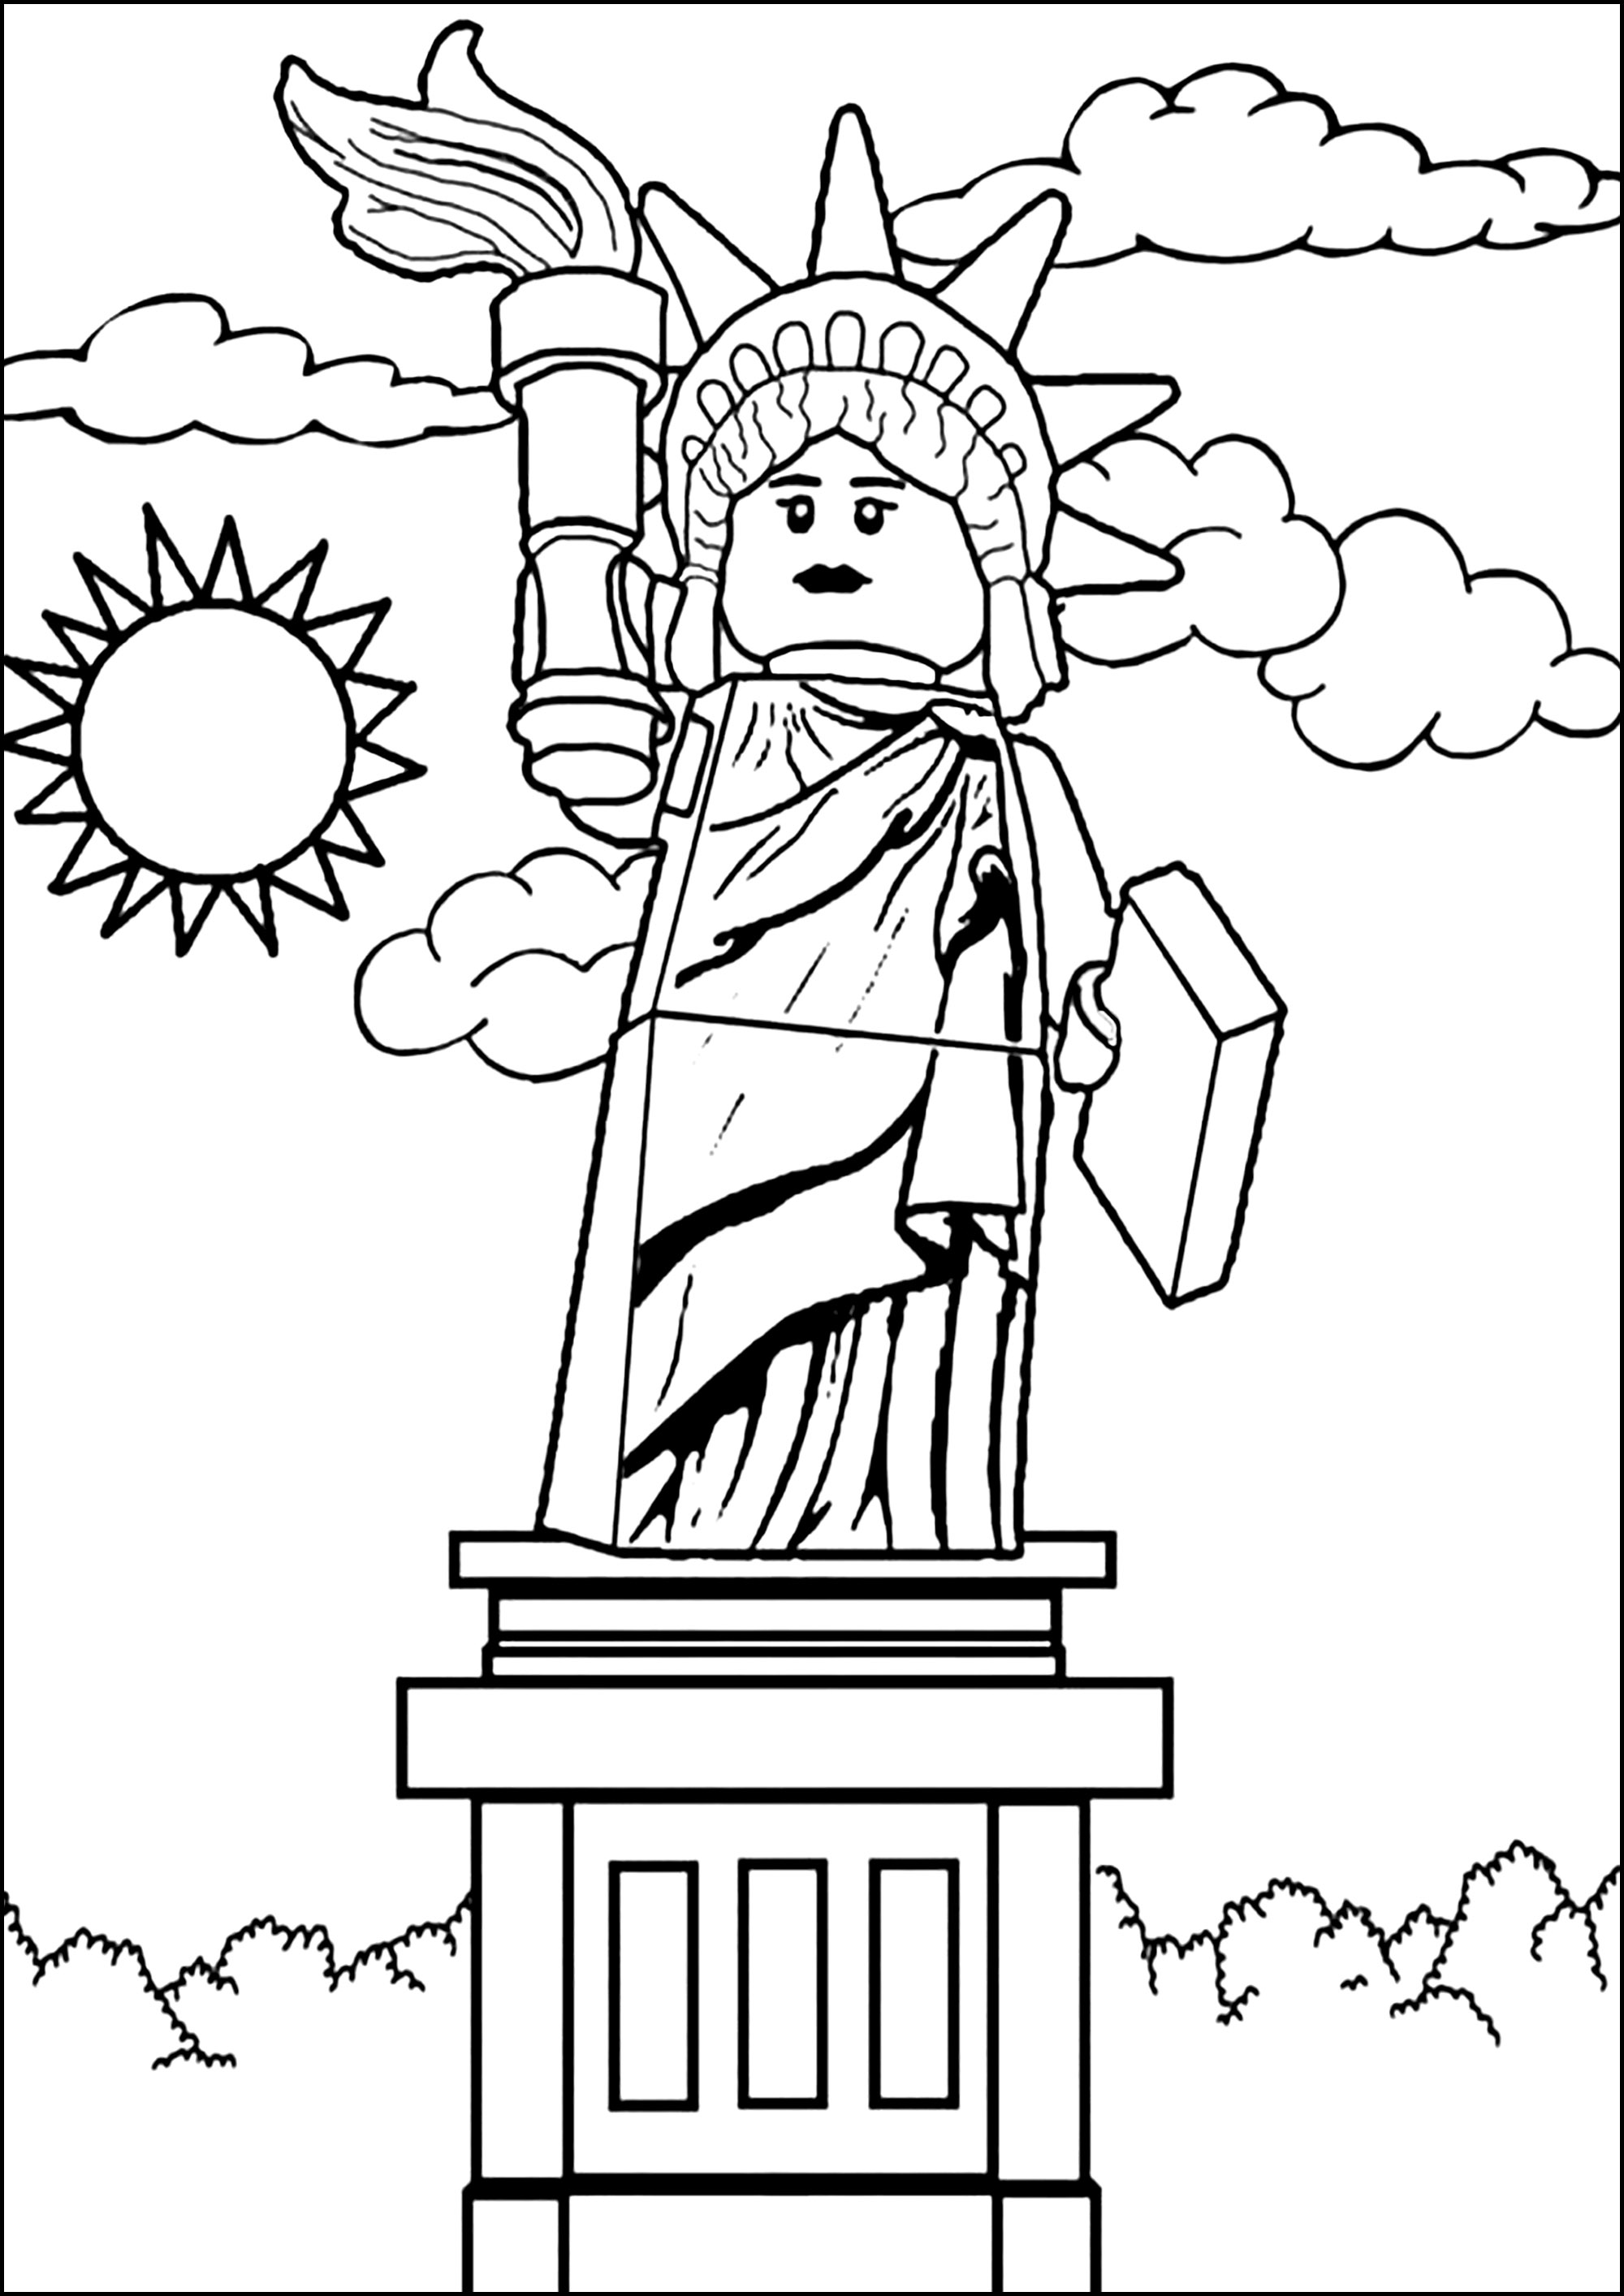 Lego coloring page to download for free